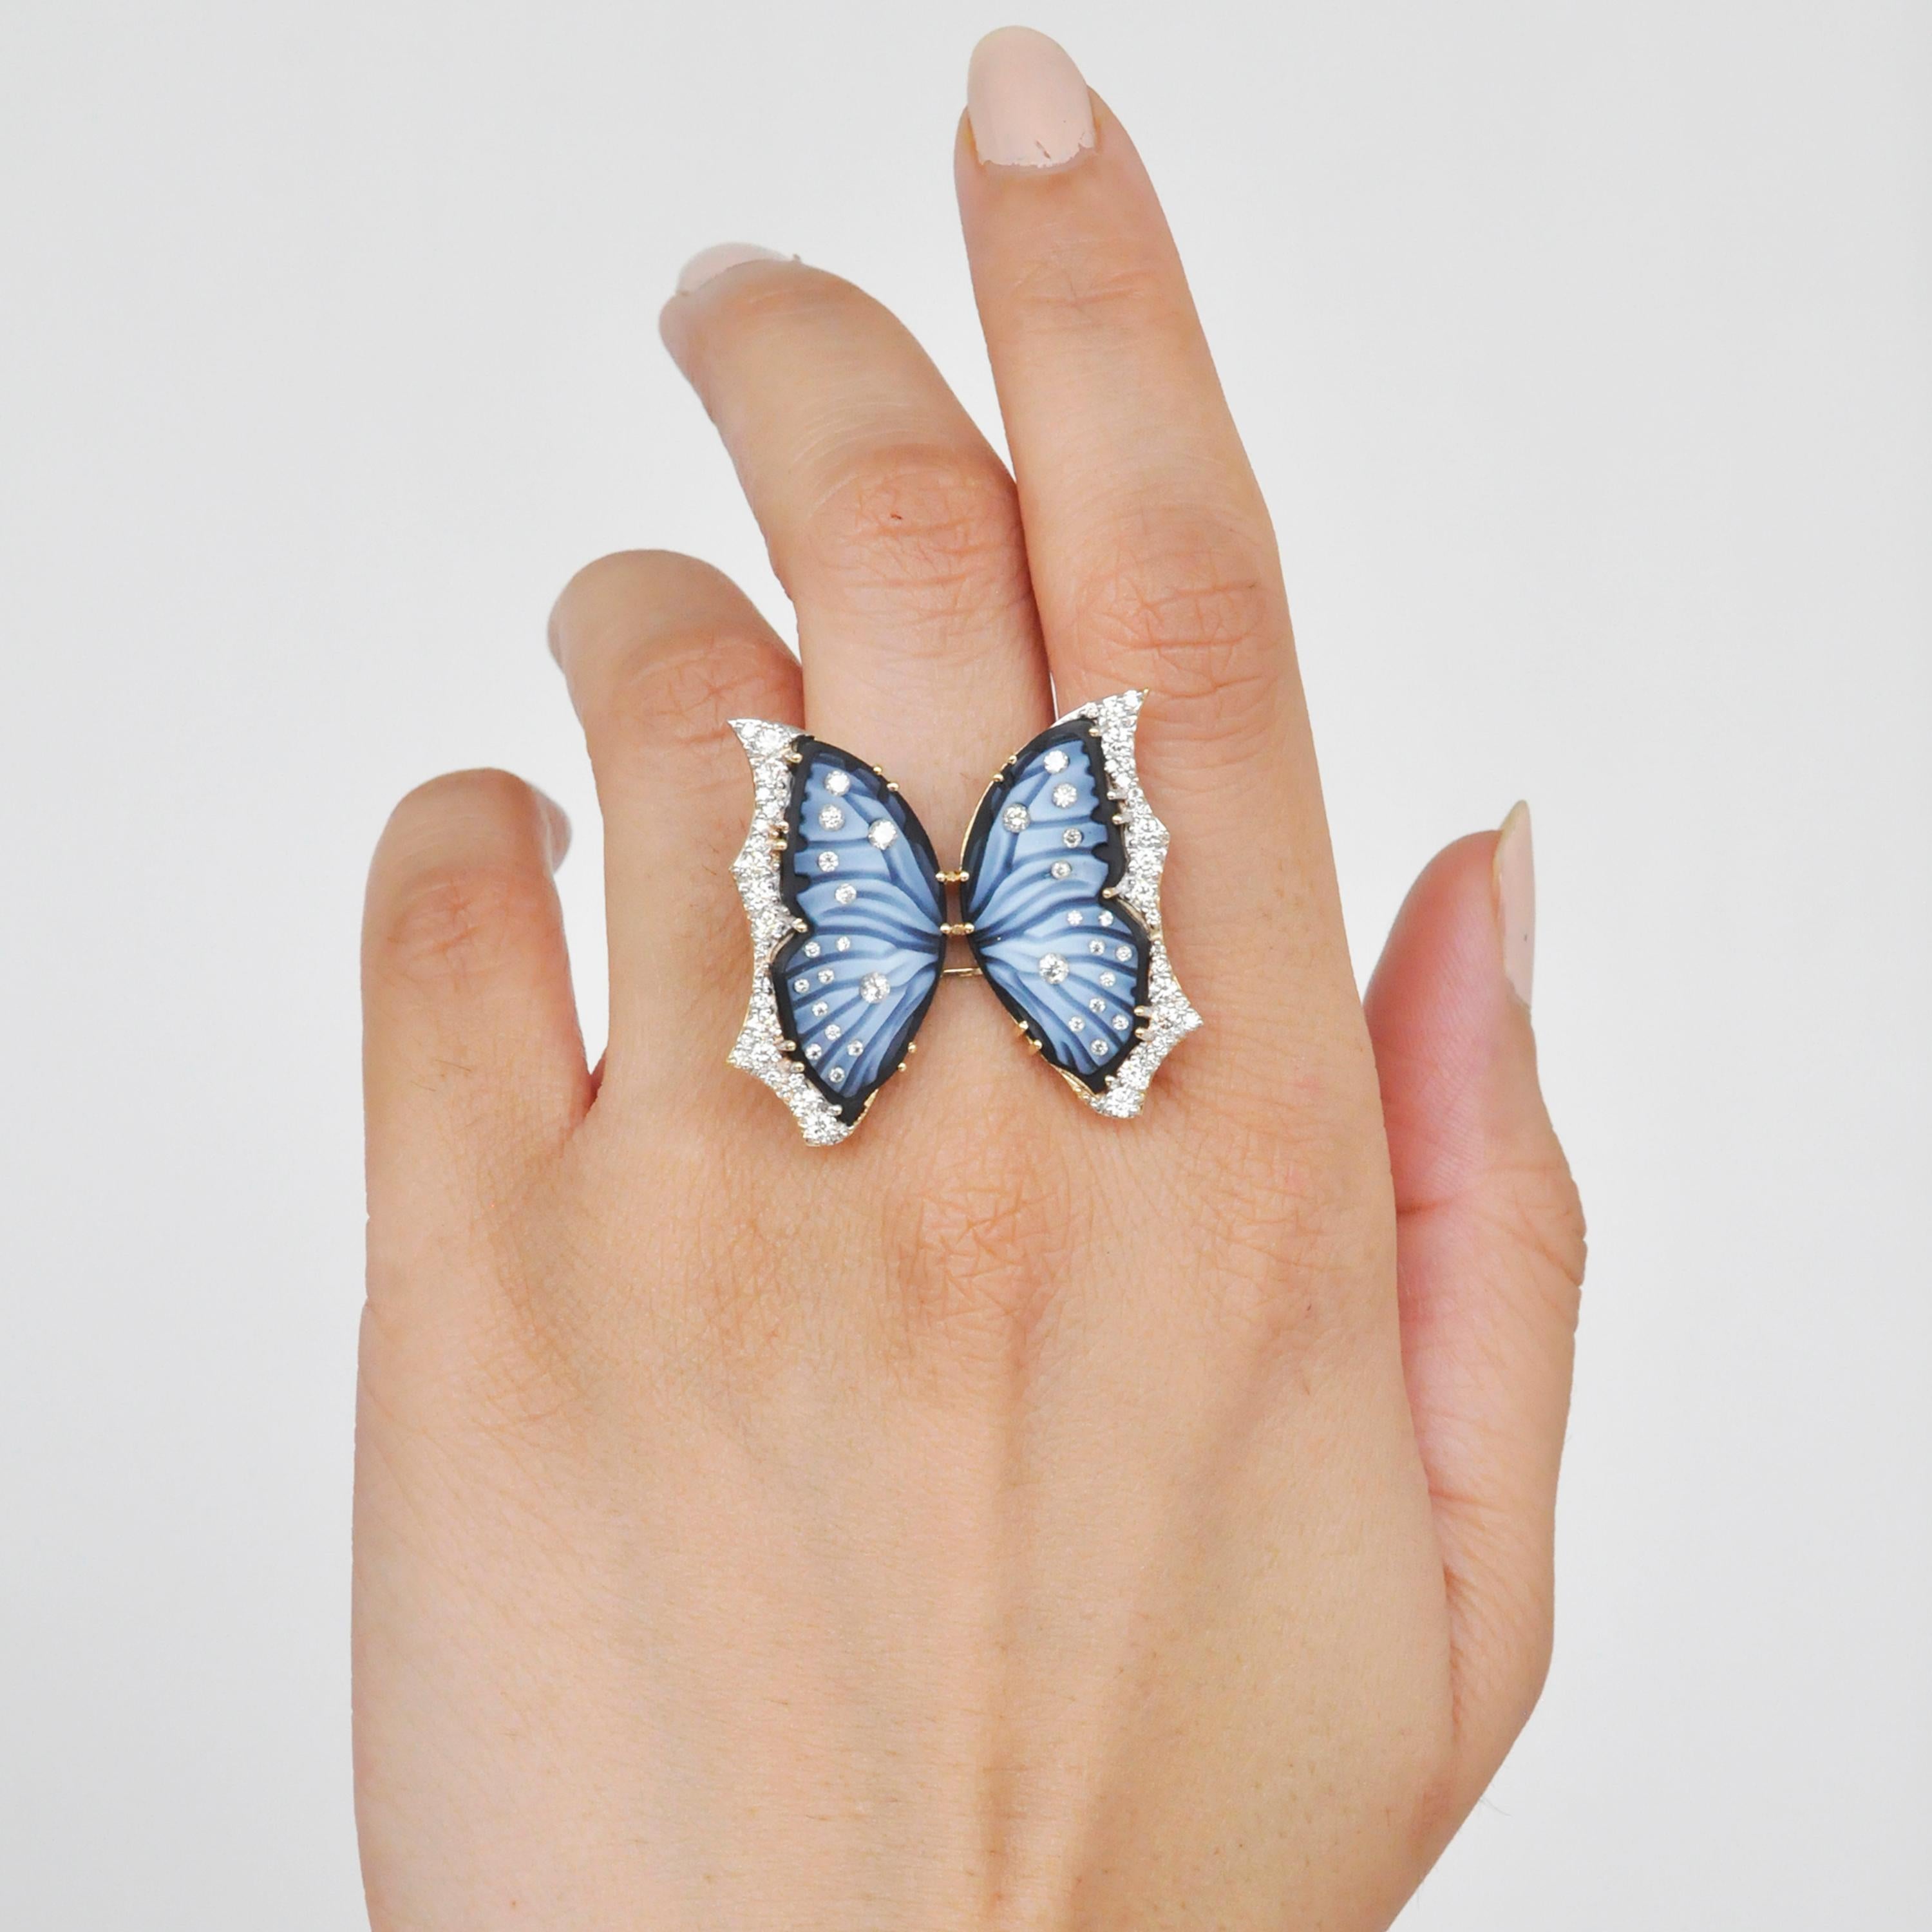 18 karat gold hand-carved agate butterfly diamond contemporary cocktail ring.

This butterfly ring is superb! The intricacy of the carving is so perfect that that the more you look at it, the more it grows on you. The process of making this ring set